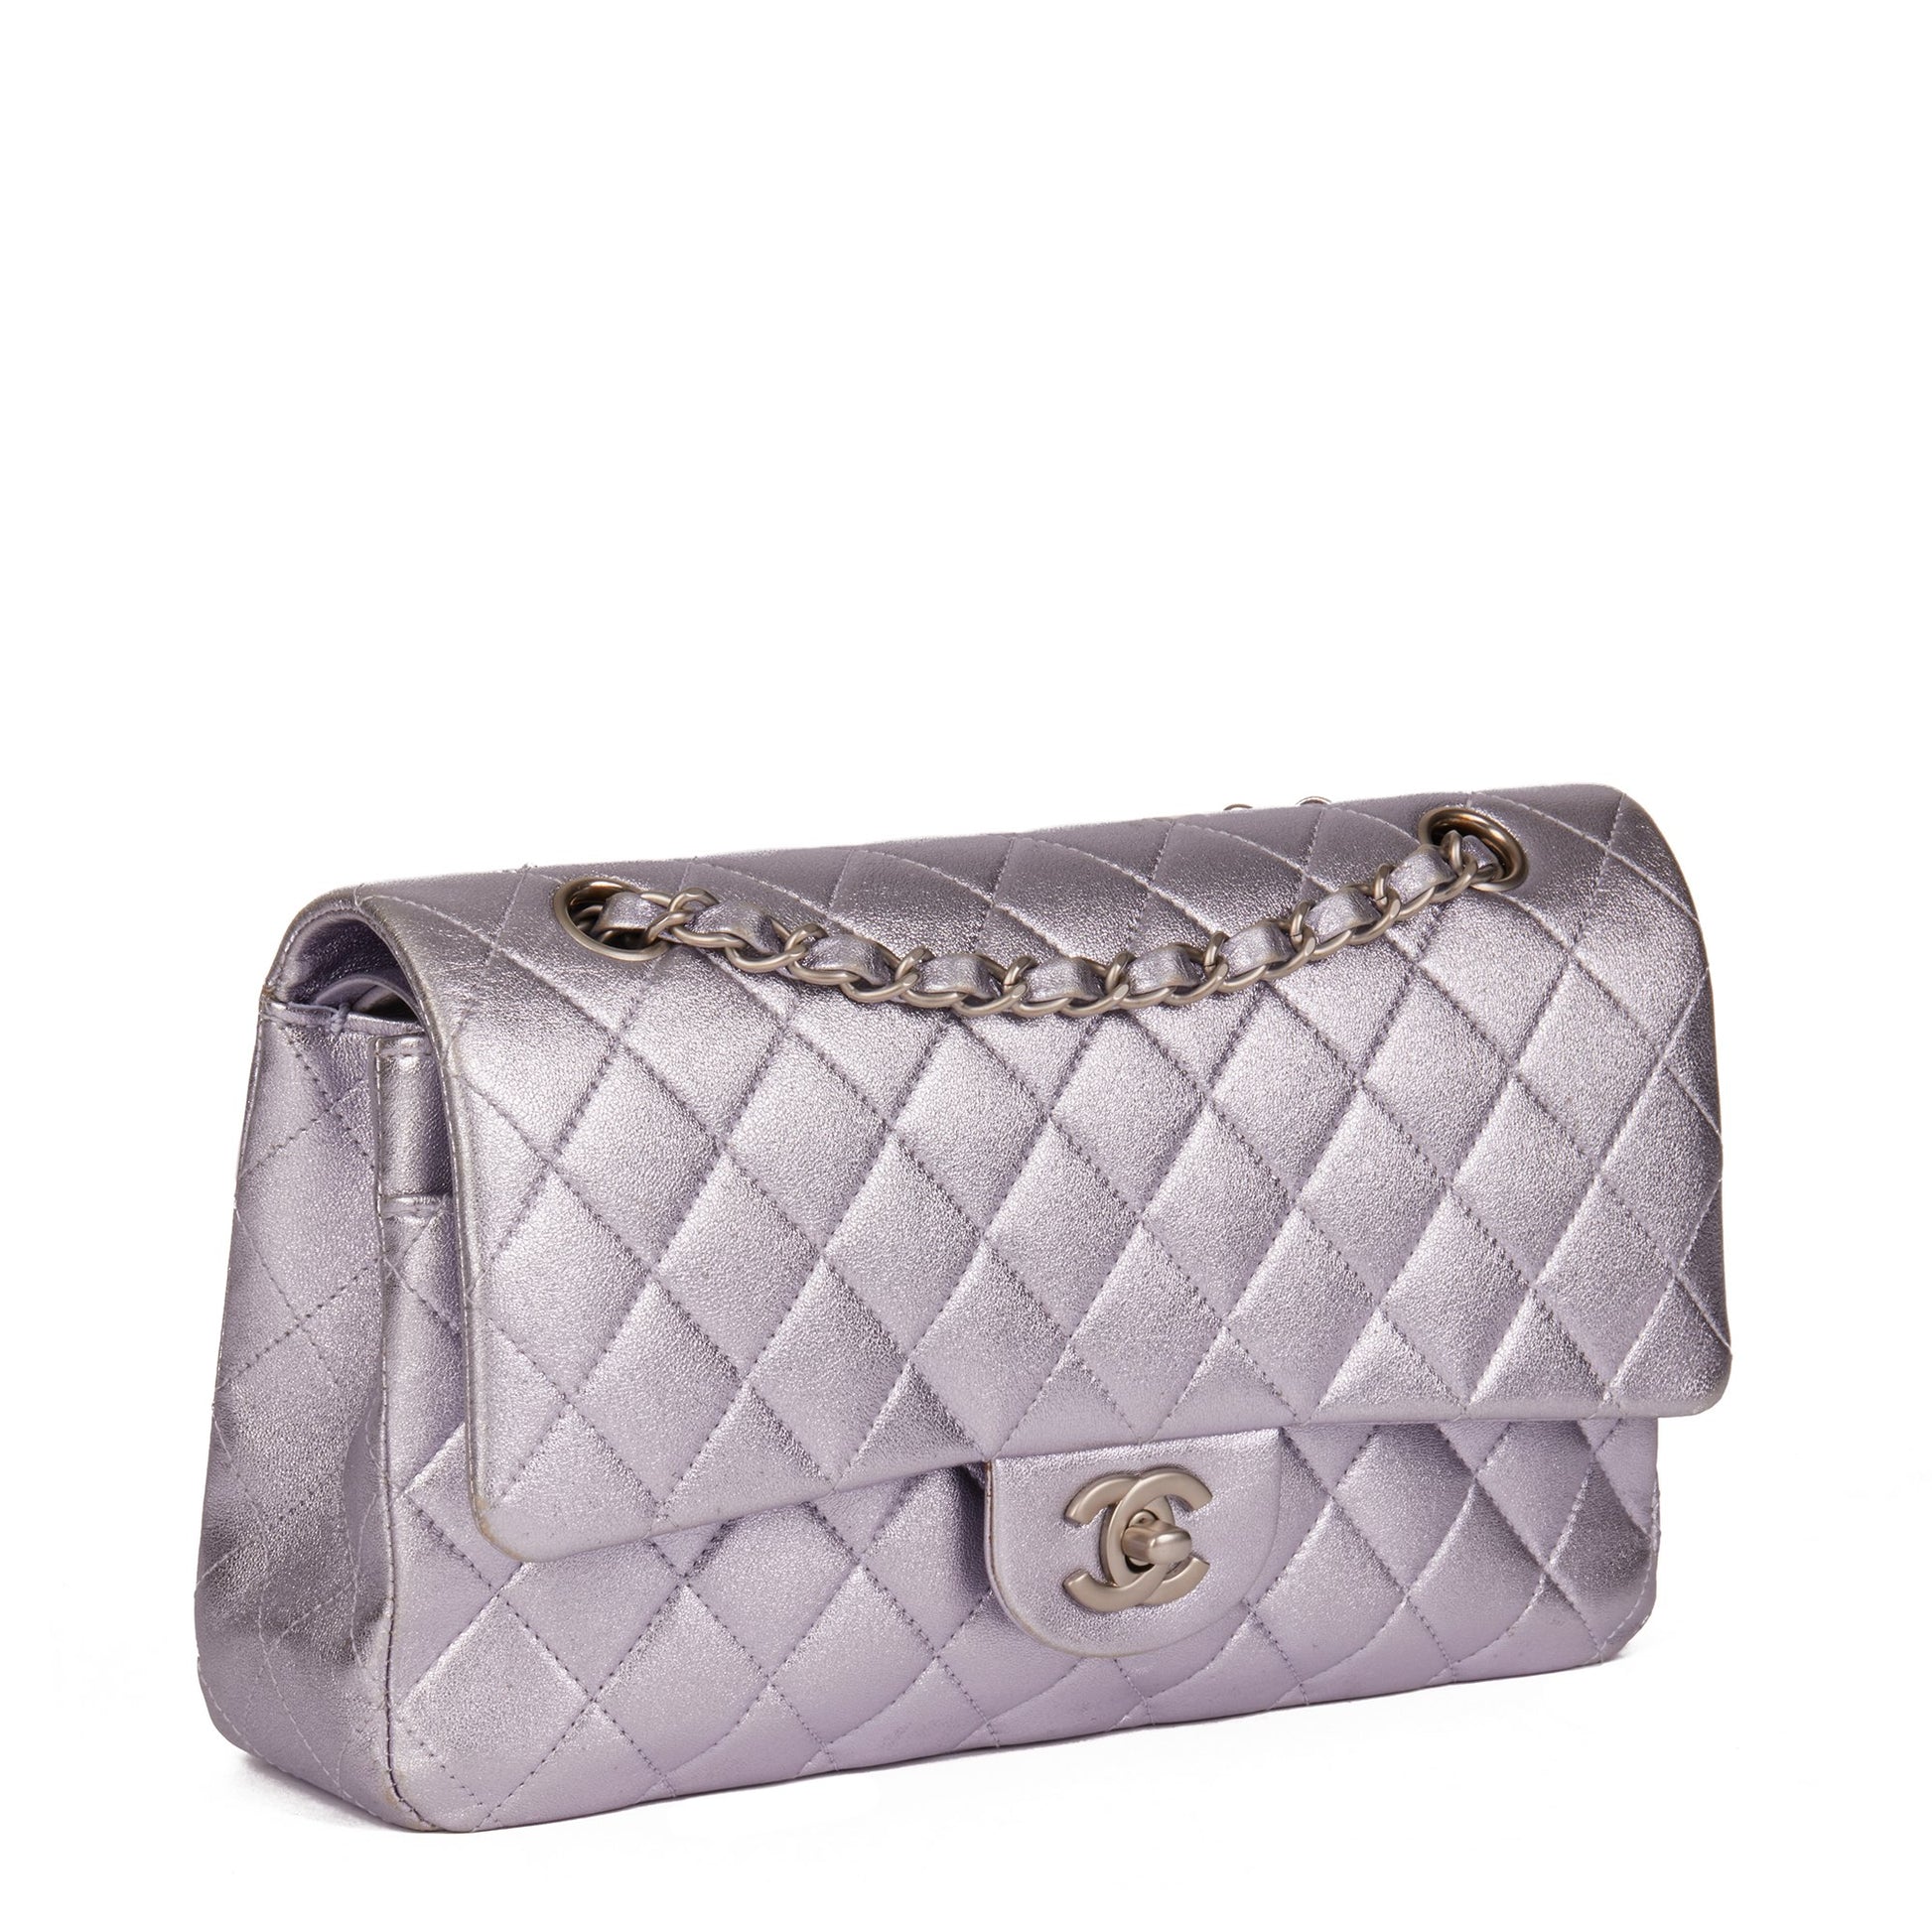 CHANEL Purple Quilted Lambskin Medium Classic Double Flap Bag